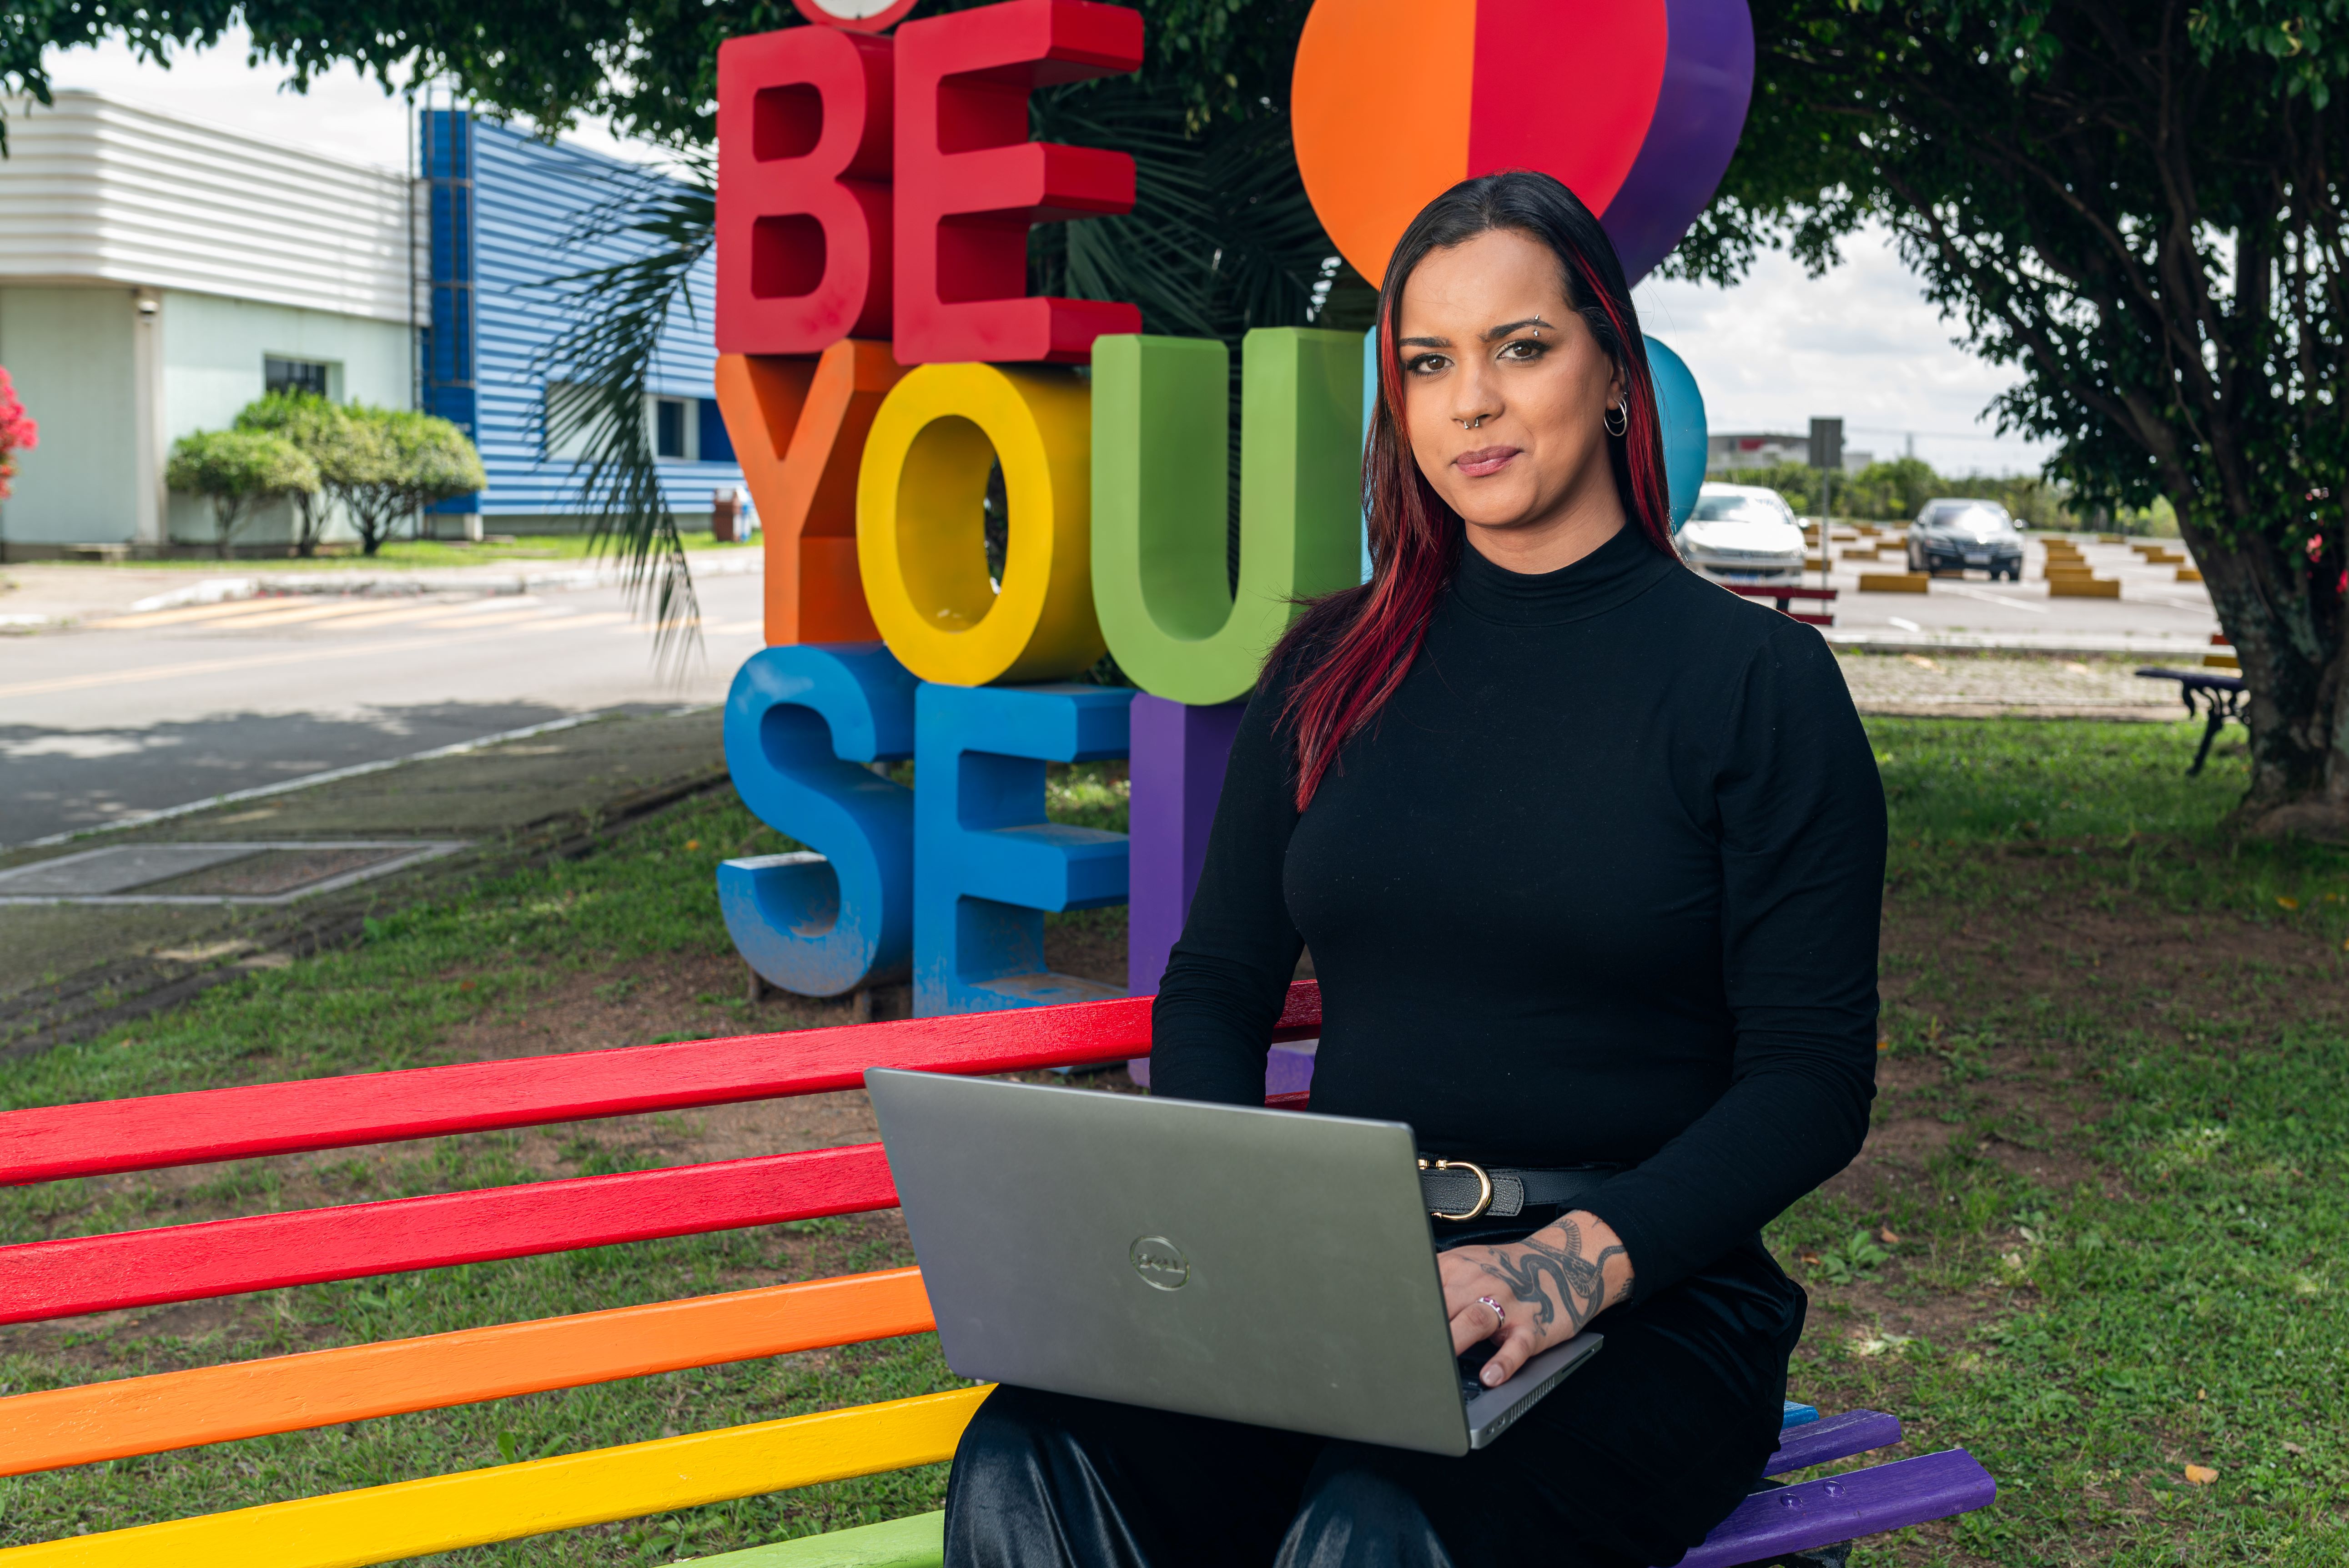 Agni sits on a rainbow bench with a sigh behind her that reads, "Be your self" in rainbow letters.